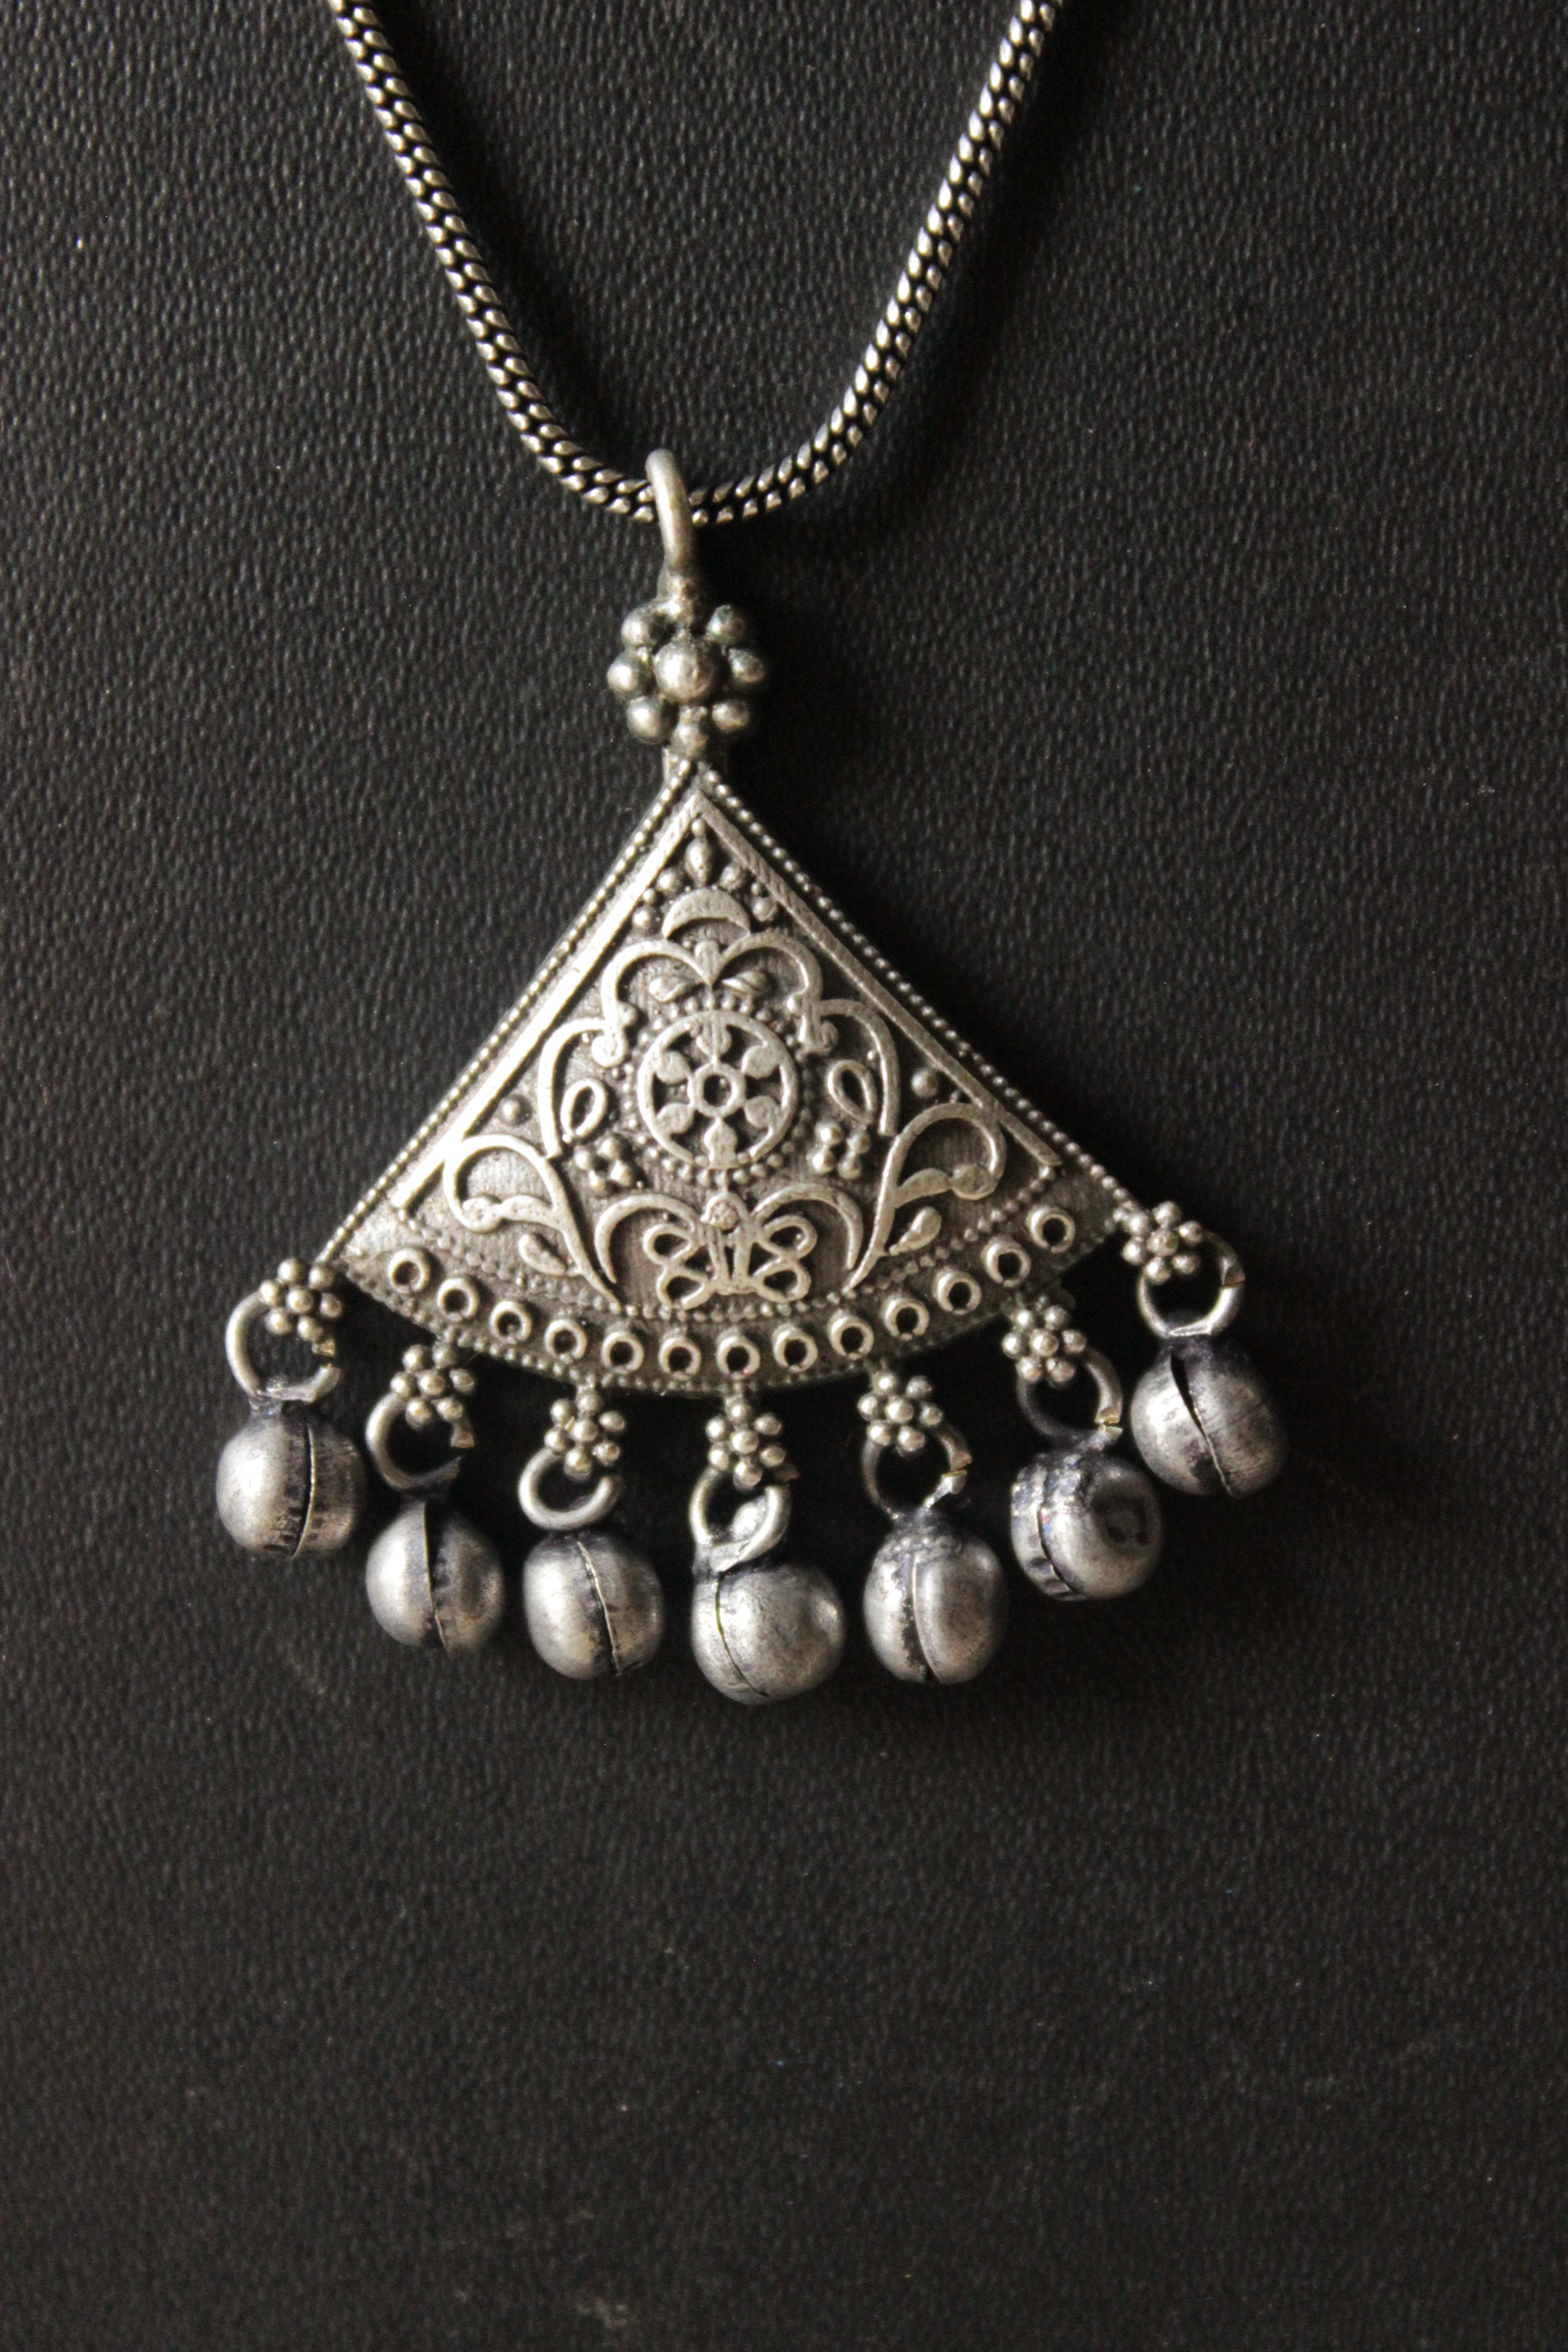 Oxidised Silver Metal Beads Embellished Triangular Chain Necklace